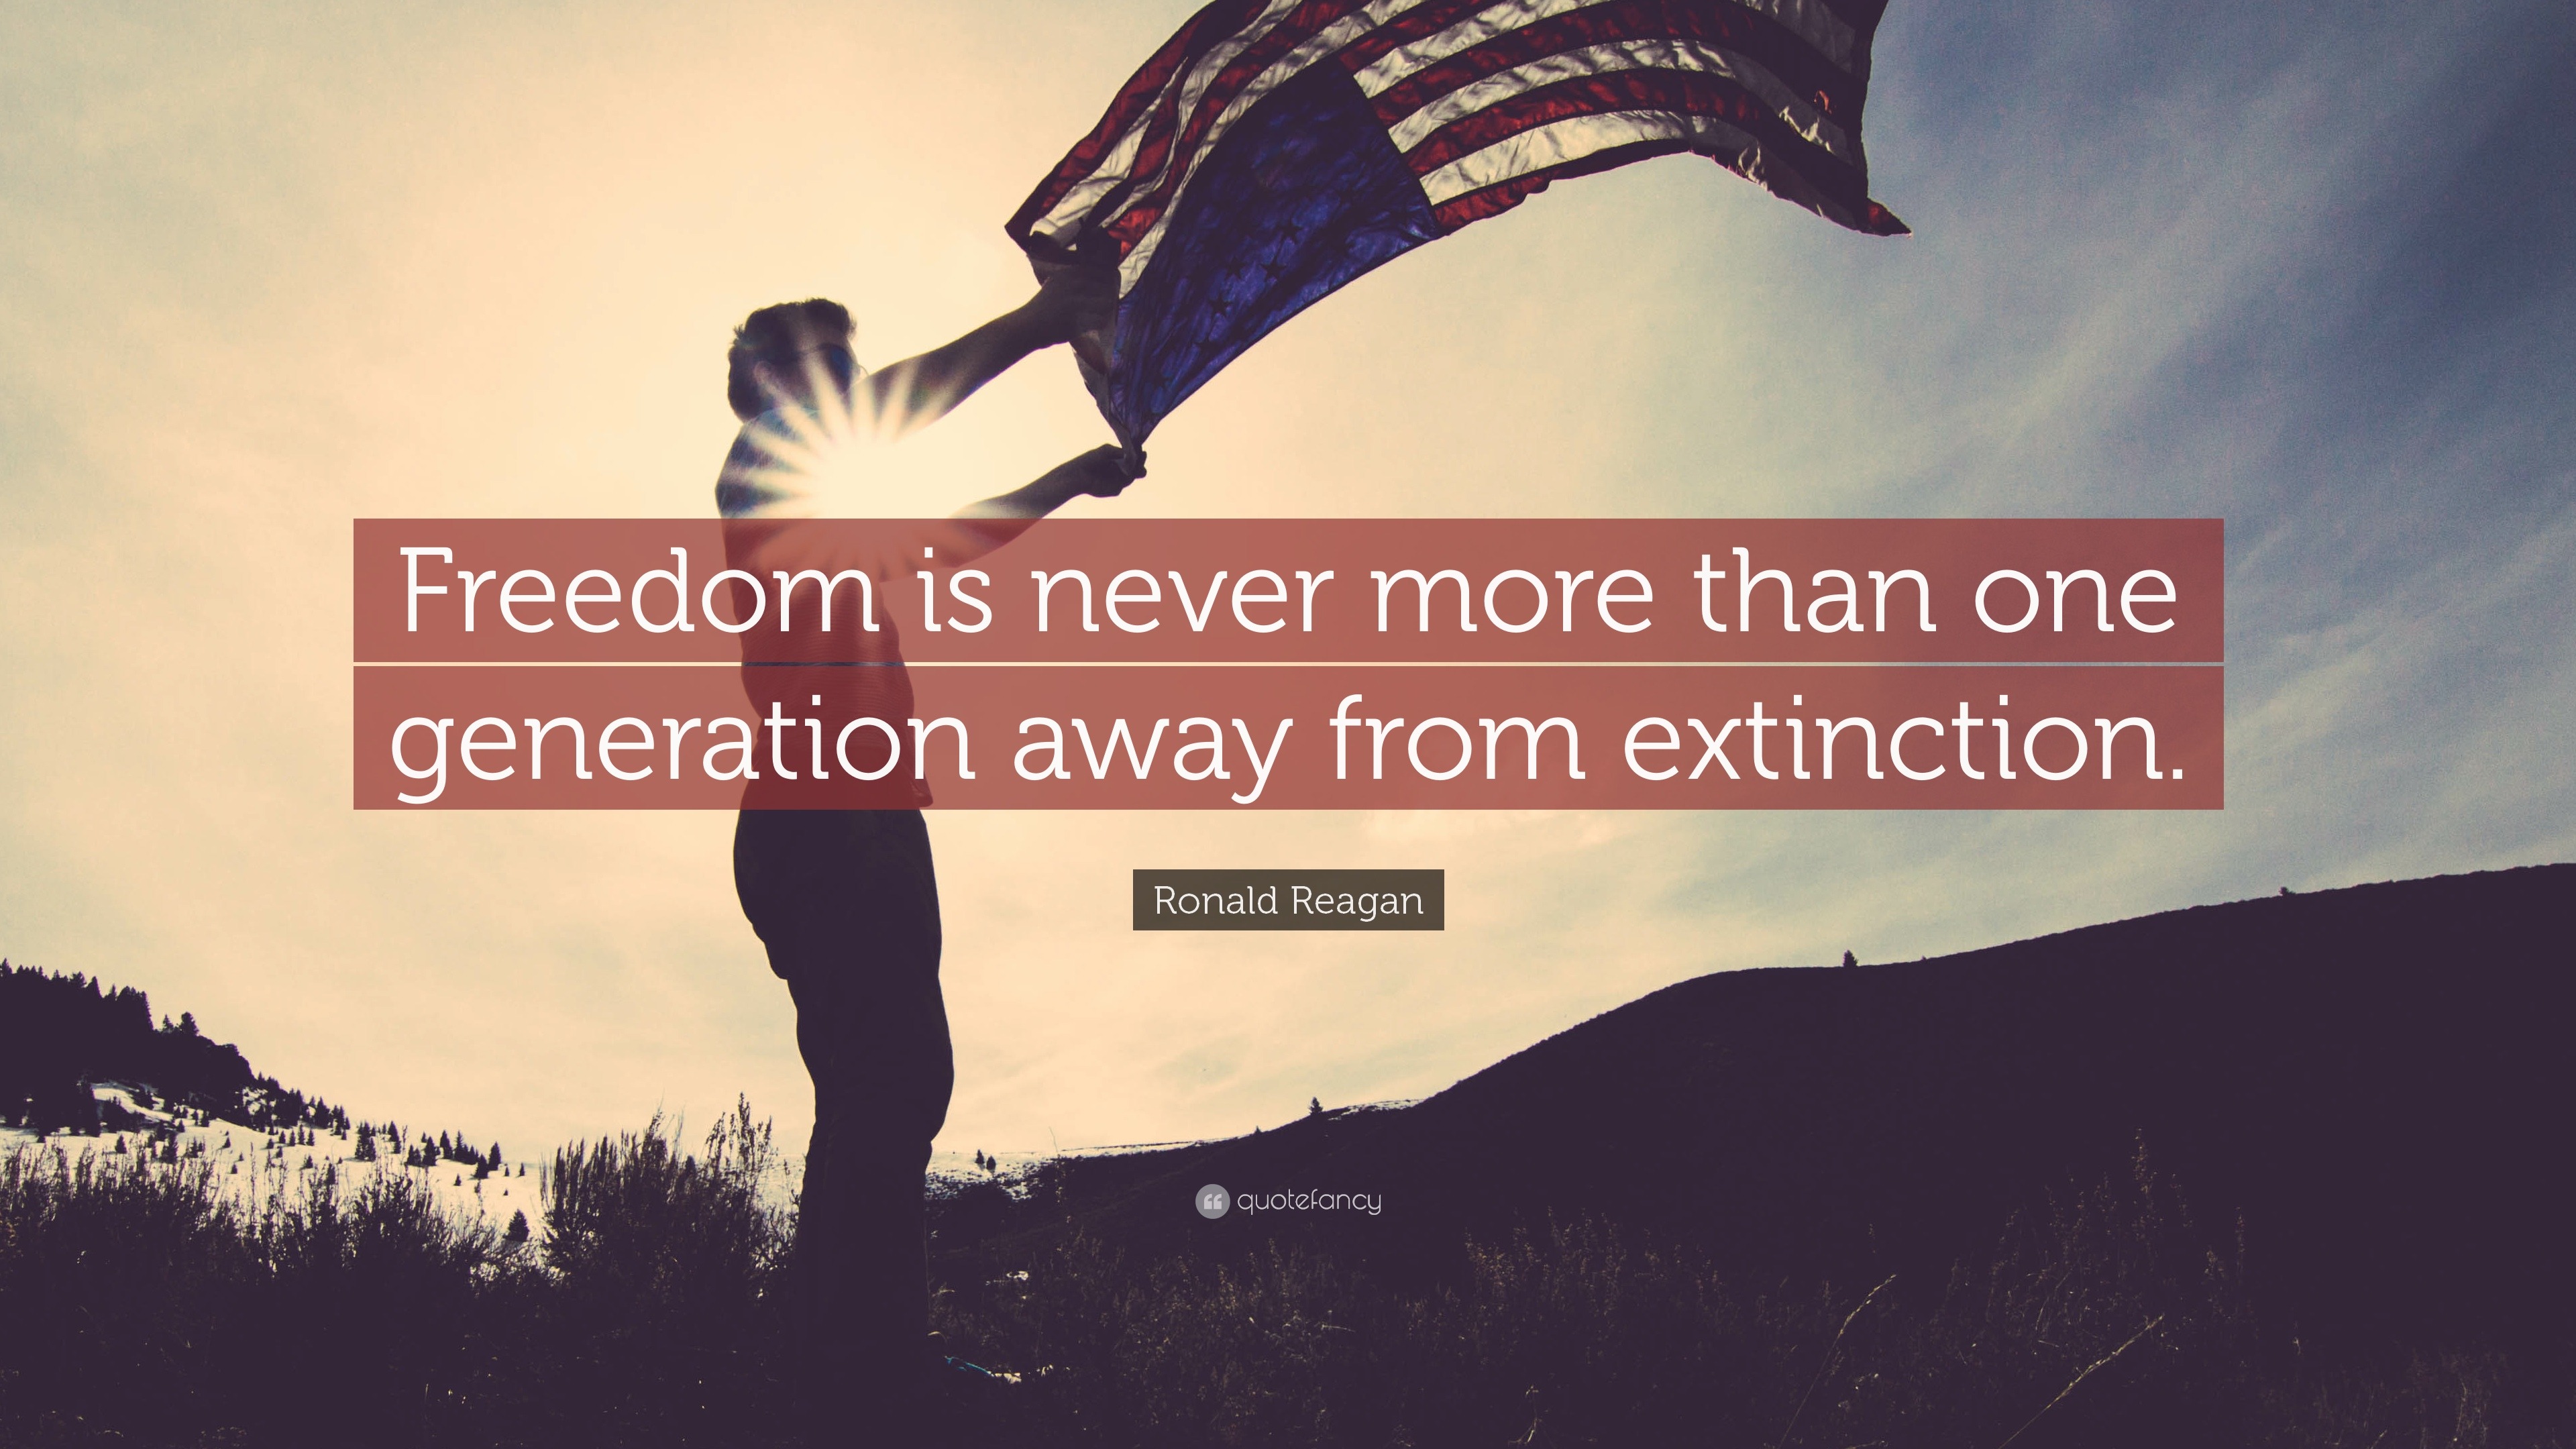 Blank Klinik Centralisere Ronald Reagan Quote: “Freedom is never more than one generation away from  extinction.”